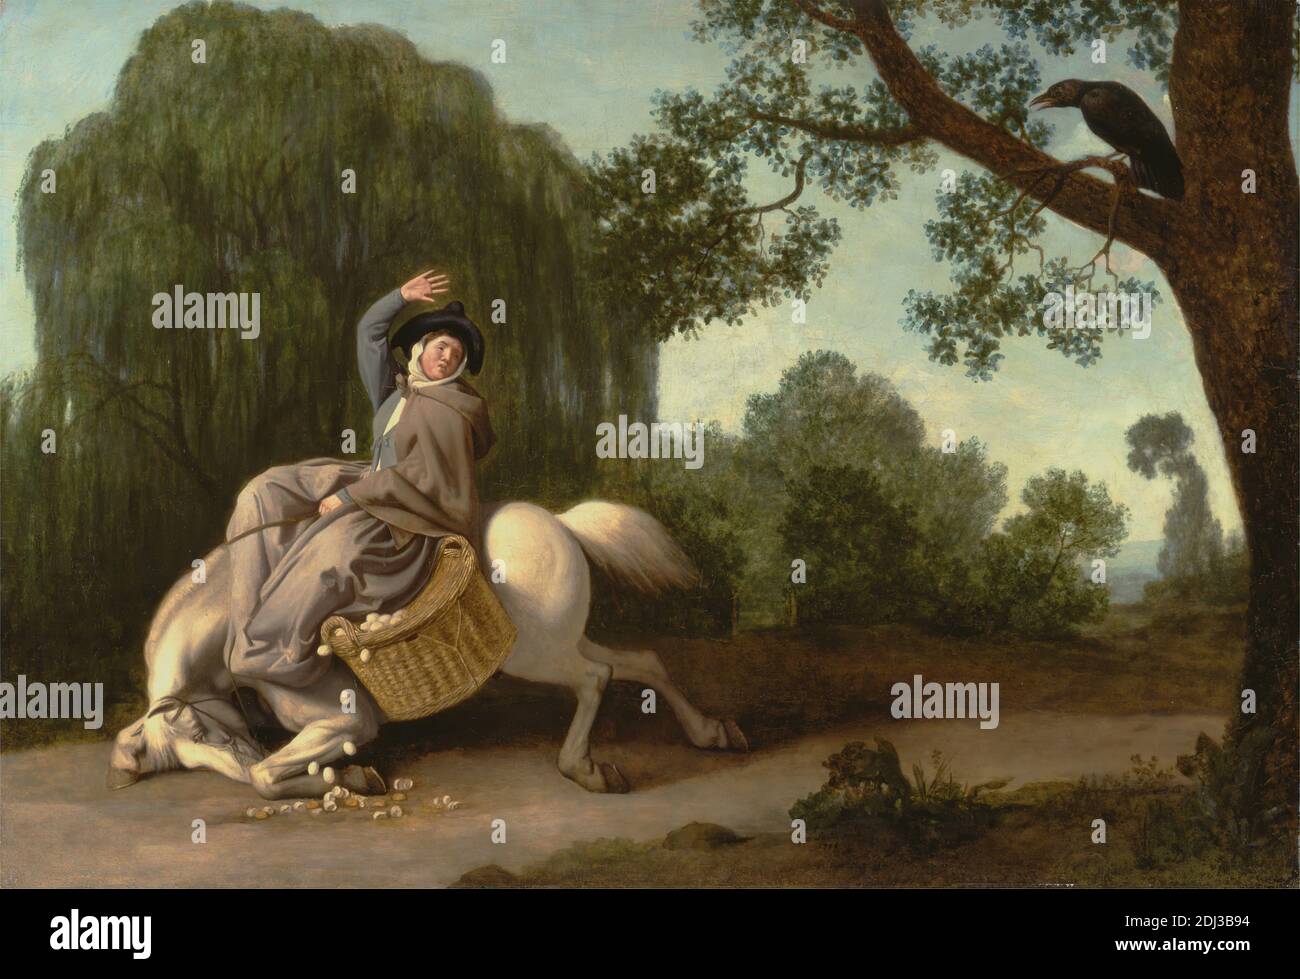 The Farmer's Wife and the Raven, George Stubbs, 1724–1806, British, 1786, beeswax and oil on millboard, Support (PTG): 26 1/2 x 38 1/2 inches (67.3 x 97.8 cm), basket, bird, broken, costume, dream, eggs, farmer, Fifty-one Fables in Verse or Fables of John Gay (1727, Part the Second 1738), frightened, genre subject, gesture, horse (animal), landscape, literary theme, literature, raven, wife, willow, woman Stock Photo